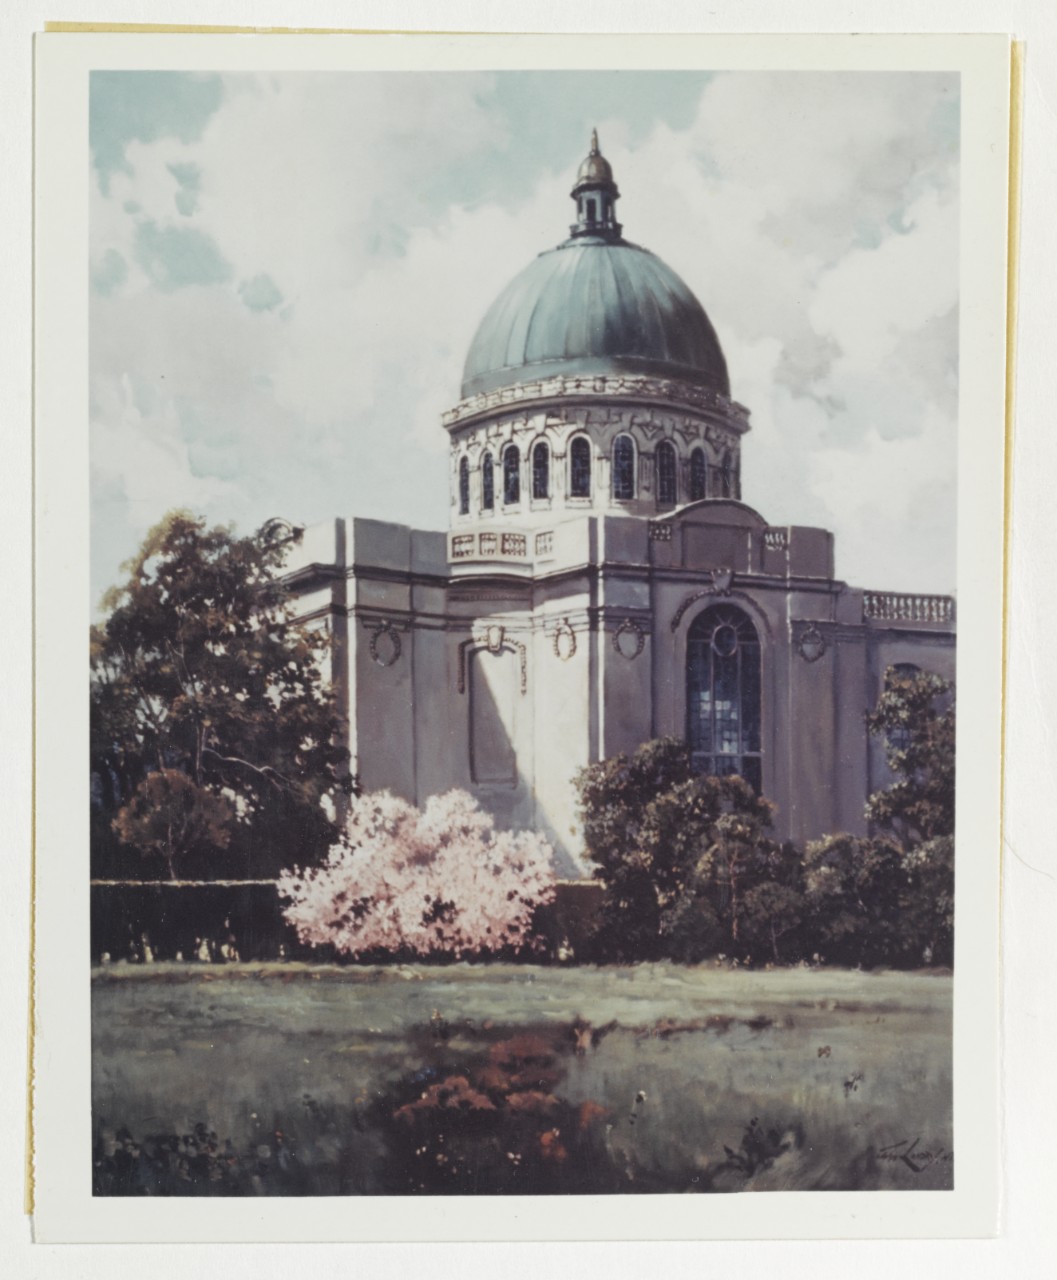 "Naval Academy chapel in spring"